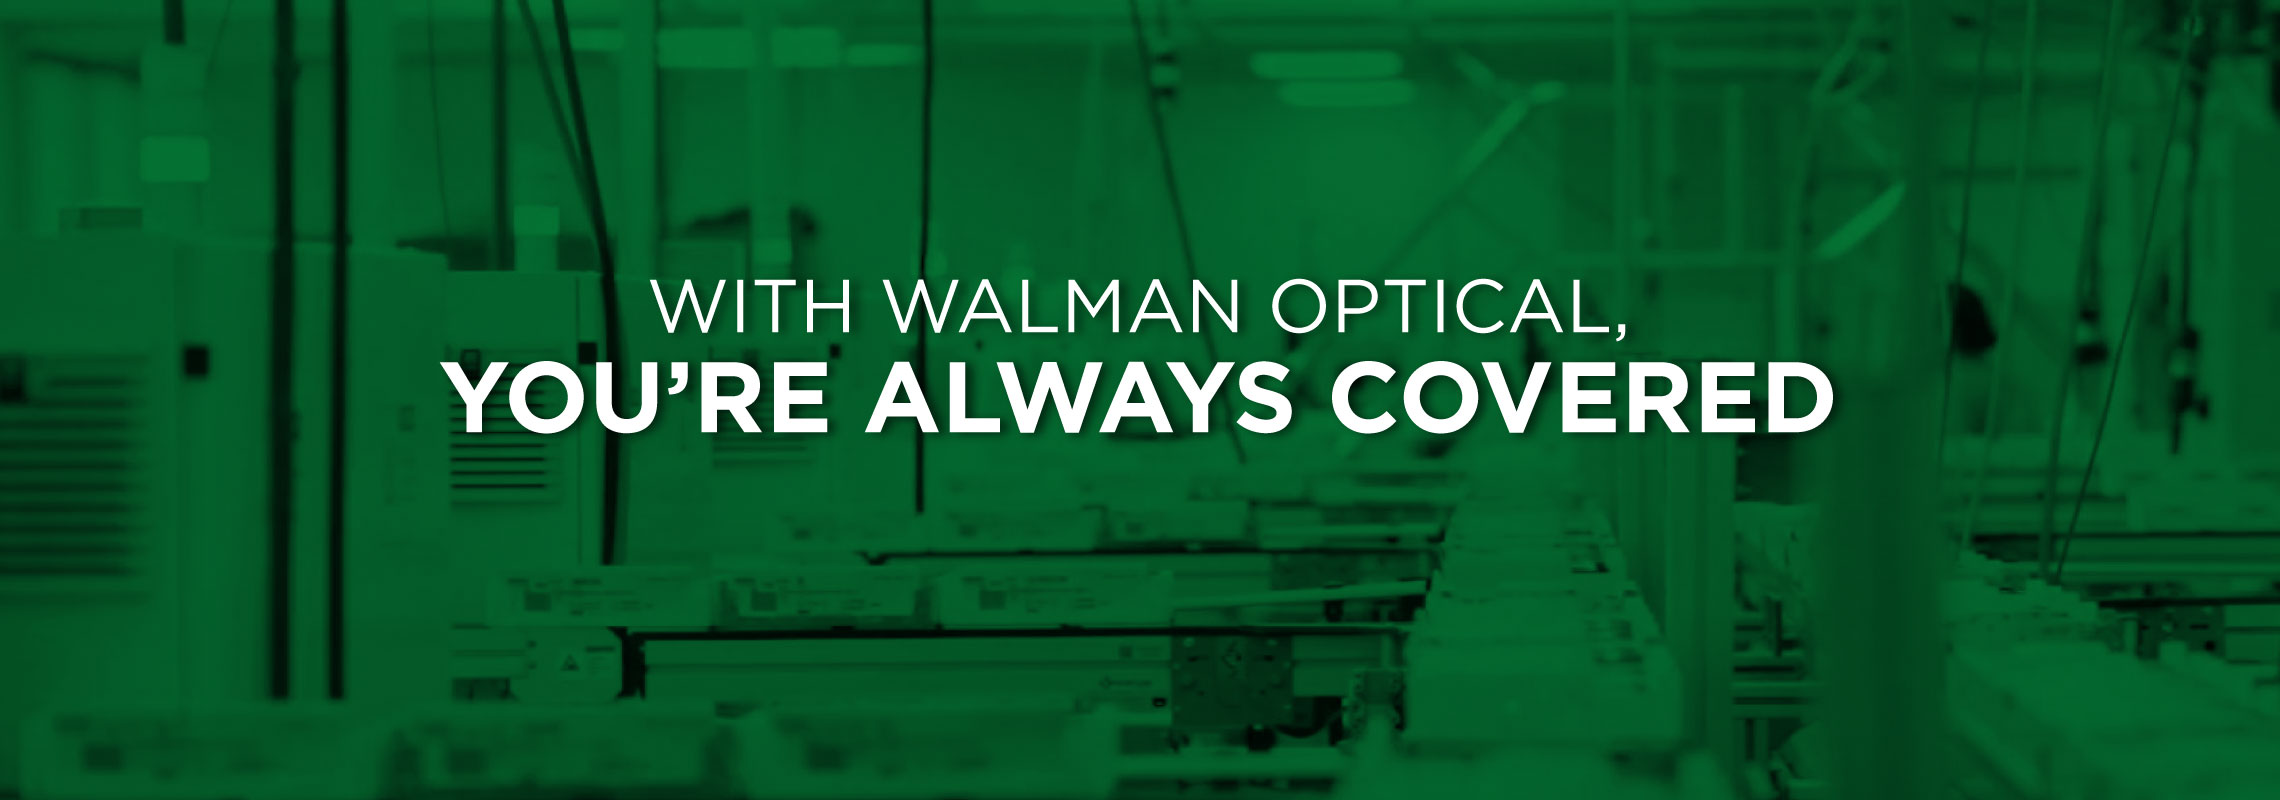 With-Walman-Optical-You-Are-Always-Covered